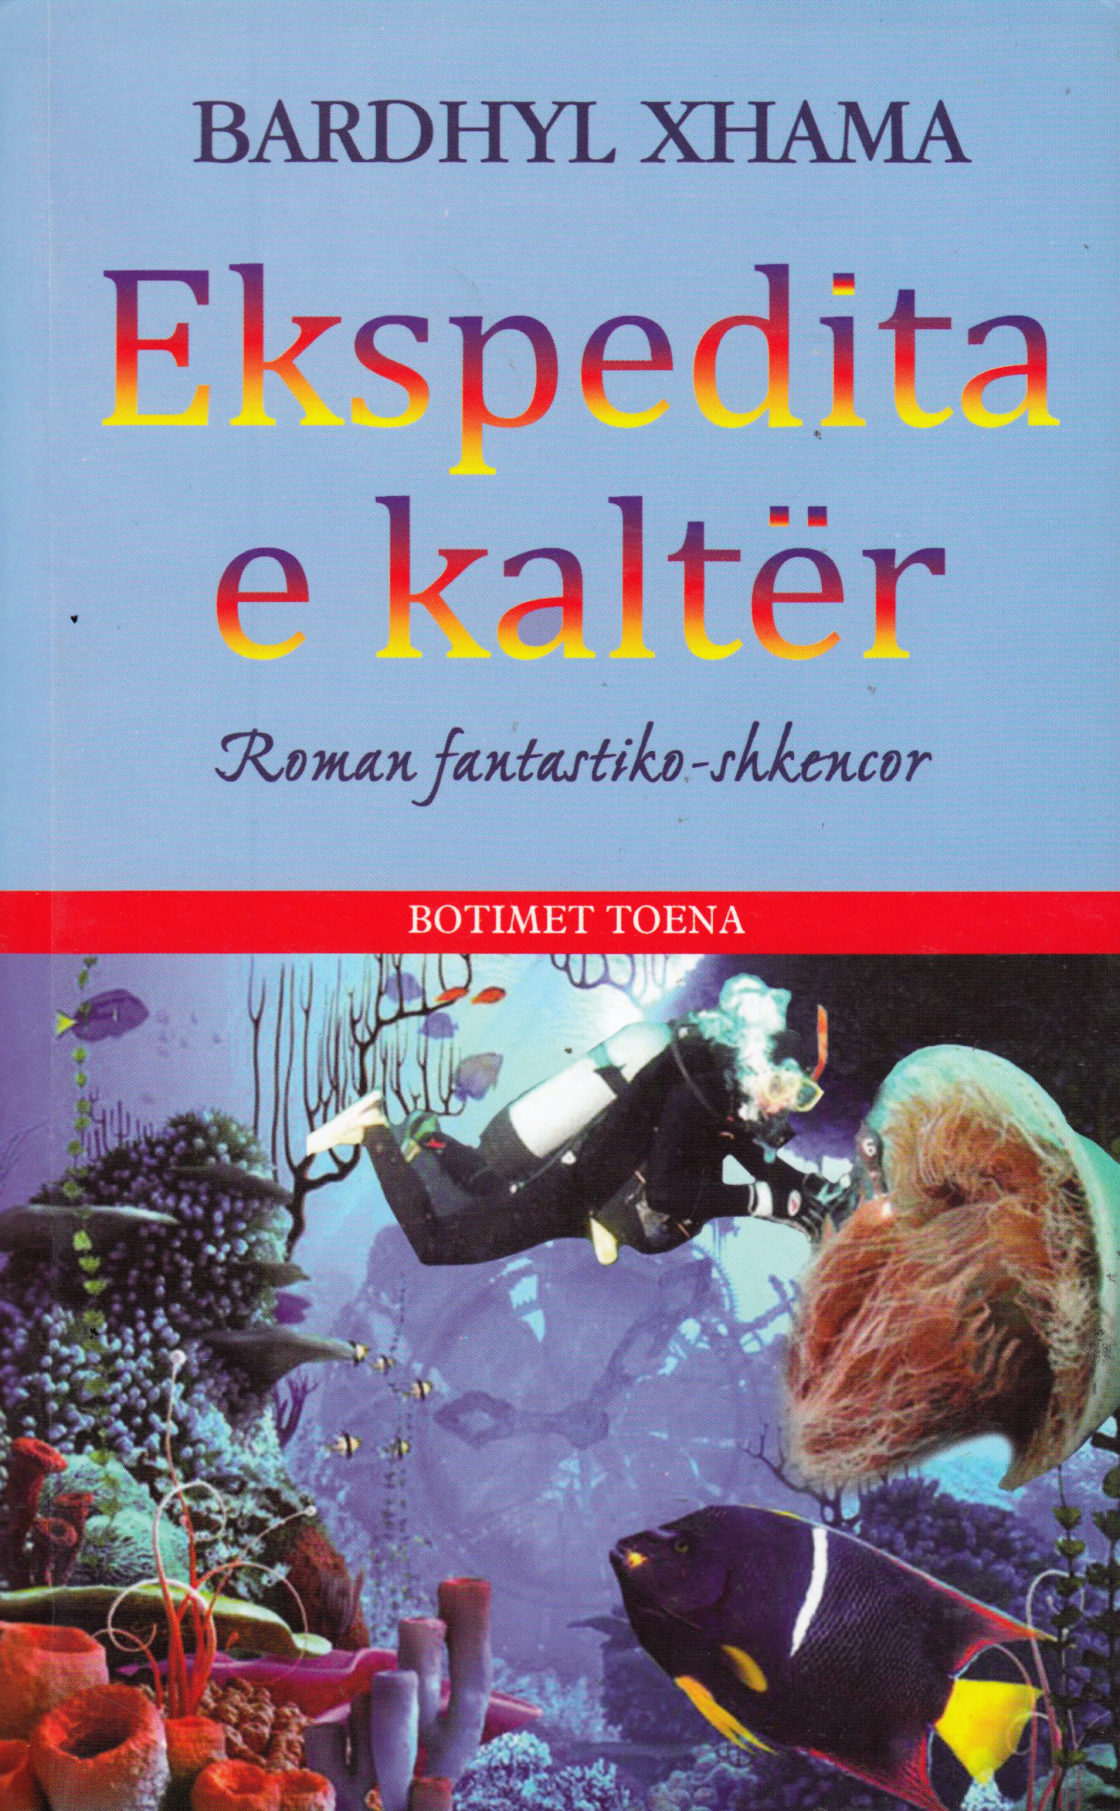 Blue expedition (Albanian)